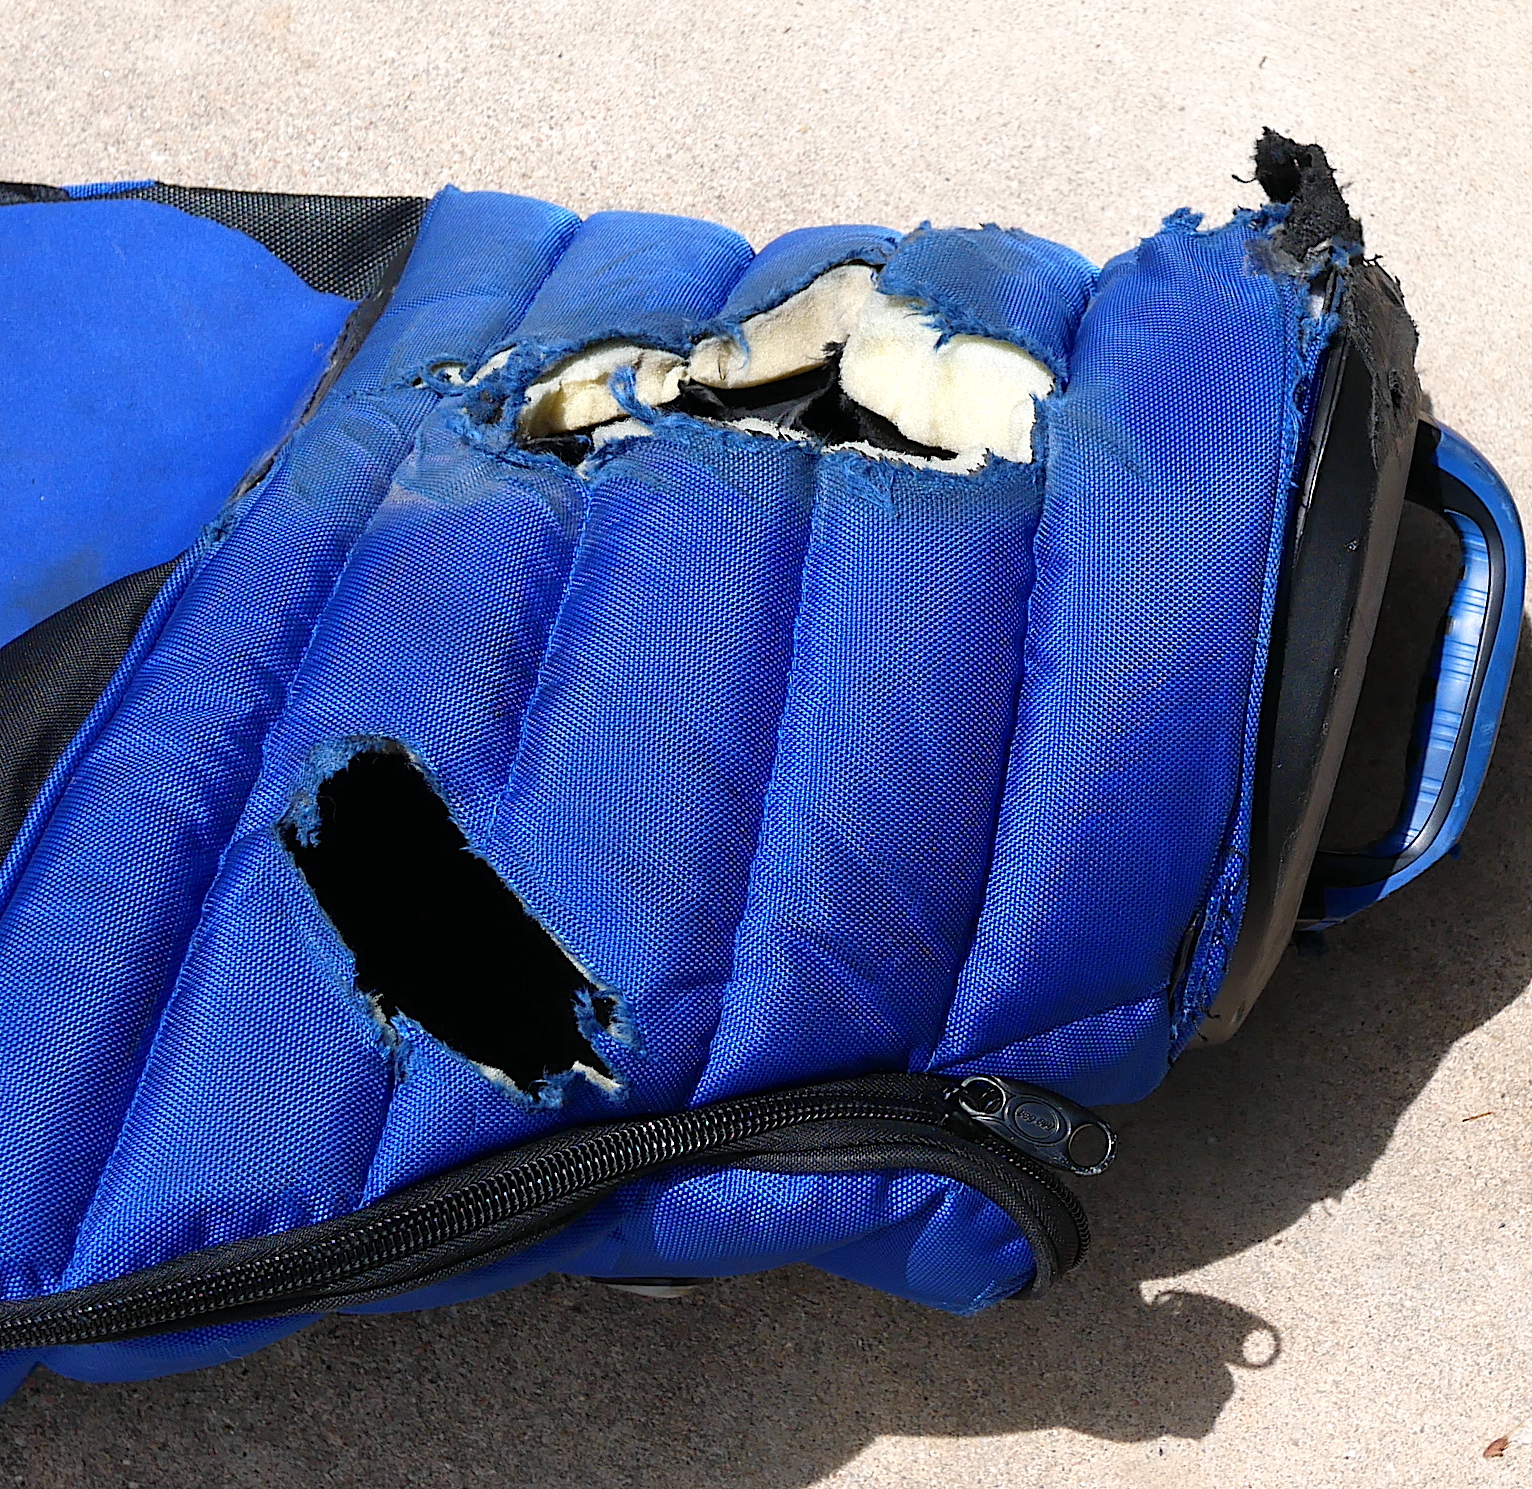 Passenger Rights: Damaged and Lost Luggage - CheckMyBus UK Blog